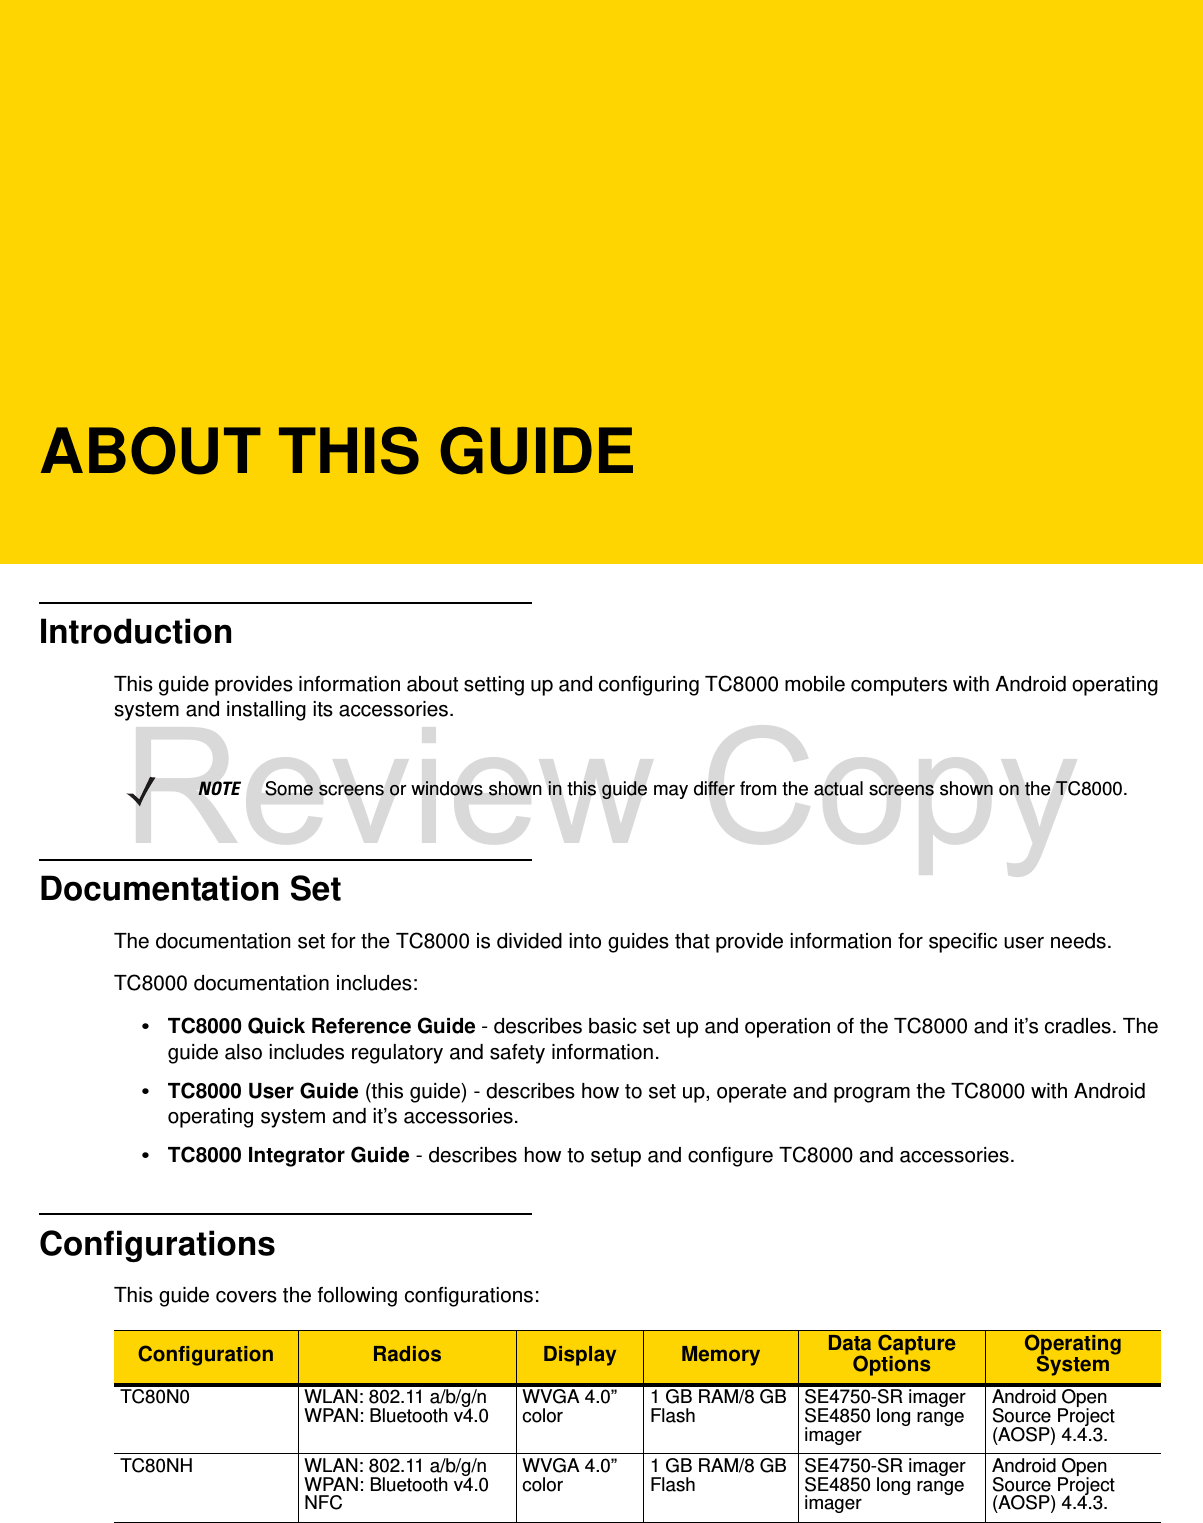 ABOUT THIS GUIDEIntroductionThis guide provides information about setting up and configuring TC8000 mobile computers with Android operating system and installing its accessories.Documentation SetThe documentation set for the TC8000 is divided into guides that provide information for specific user needs.TC8000 documentation includes:•TC8000 Quick Reference Guide - describes basic set up and operation of the TC8000 and it’s cradles. The guide also includes regulatory and safety information.•TC8000 User Guide (this guide) - describes how to set up, operate and program the TC8000 with Android operating system and it’s accessories.•TC8000 Integrator Guide - describes how to setup and configure TC8000 and accessories.ConfigurationsThis guide covers the following configurations:NOTE     Some screens or windows shown in this guide may differ from the actual screens shown on the TC8000.Configuration Radios Display Memory Data Capture Options OperatingSystemTC80N0 WLAN: 802.11 a/b/g/nWPAN: Bluetooth v4.0 WVGA 4.0” color 1 GB RAM/8 GB Flash SE4750-SR imagerSE4850 long range imagerAndroid Open Source Project (AOSP) 4.4.3.TC80NH WLAN: 802.11 a/b/g/nWPAN: Bluetooth v4.0NFCWVGA 4.0” color 1 GB RAM/8 GB Flash SE4750-SR imagerSE4850 long range imagerAndroid Open Source Project (AOSP) 4.4.3.Review Copy